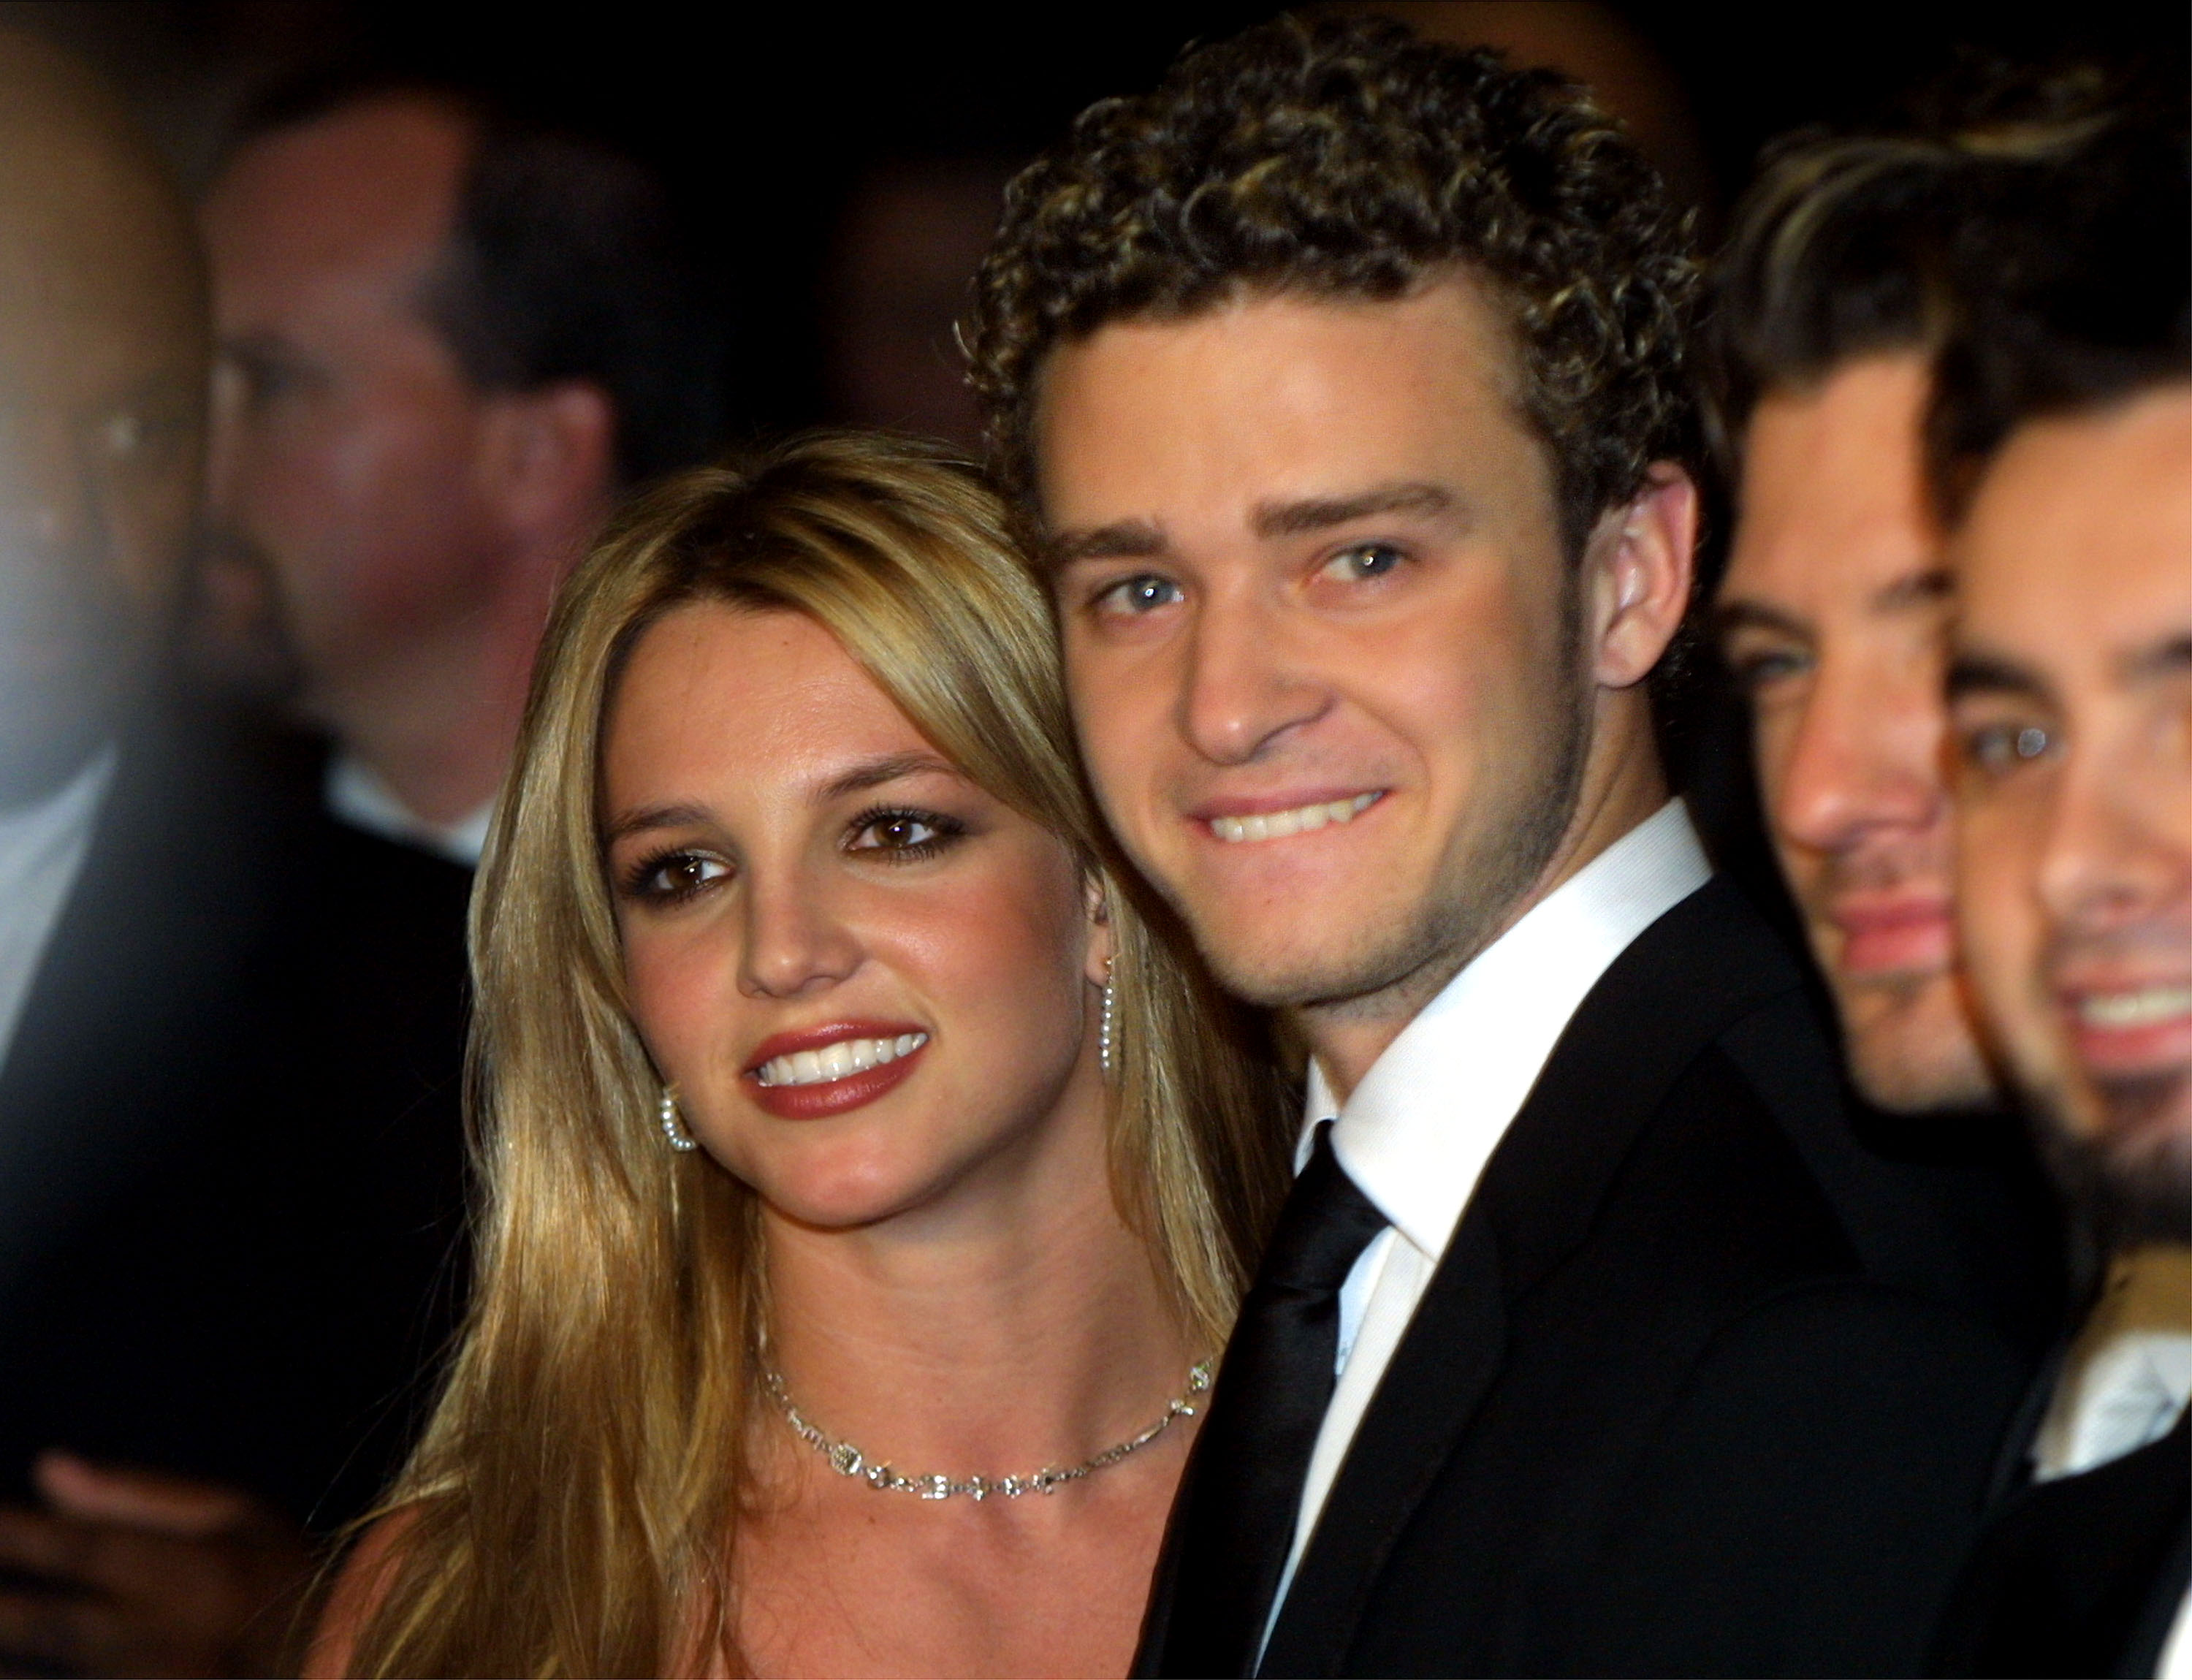 Britney Spears, Justin Timberlake and why 2002 changed them forever